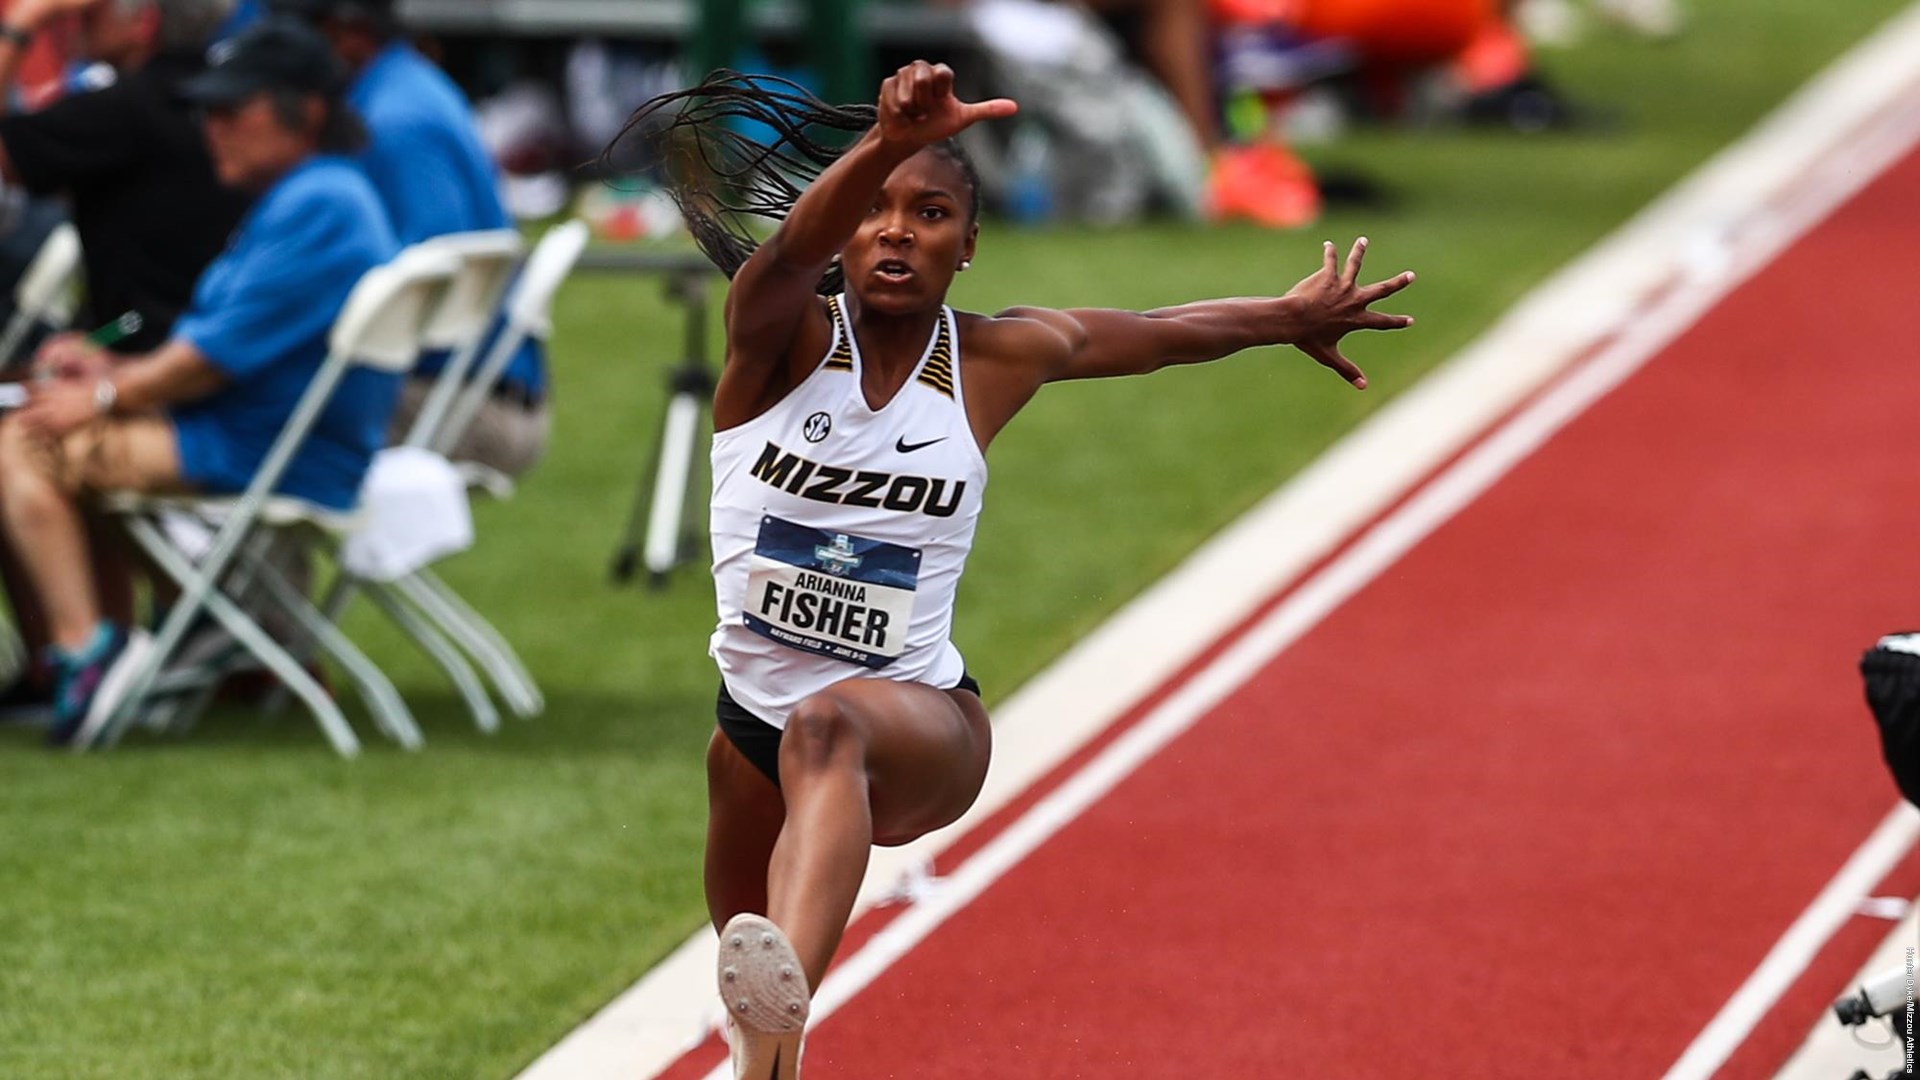 Arianna Fisher at the 2021 NCAA Outdoor Track & Field Championships